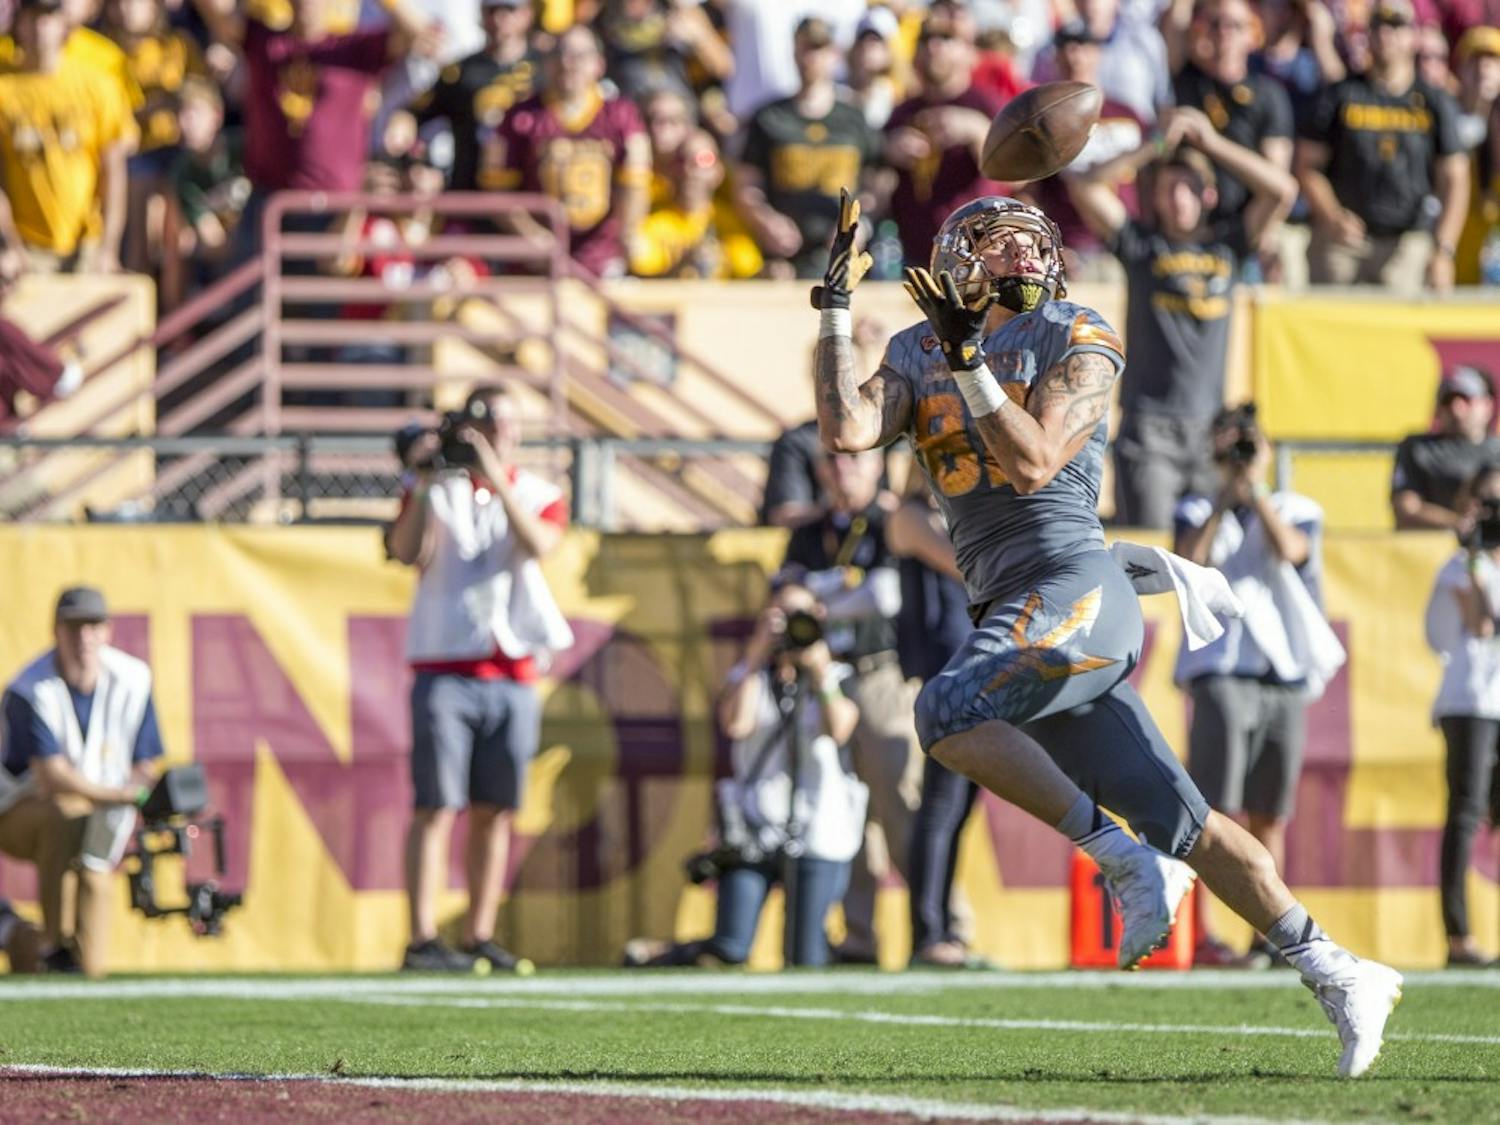 Redshirt freshman wide receiver Jalen Harvey hauls in a long ball for a touchdown in the second half of a game at Sun Devil Stadium in Tempe, Ariz., on Saturday, Nov. 21, 2015. The ASU Sun Devils led the UA Wildcats 31-10 at halftime. 